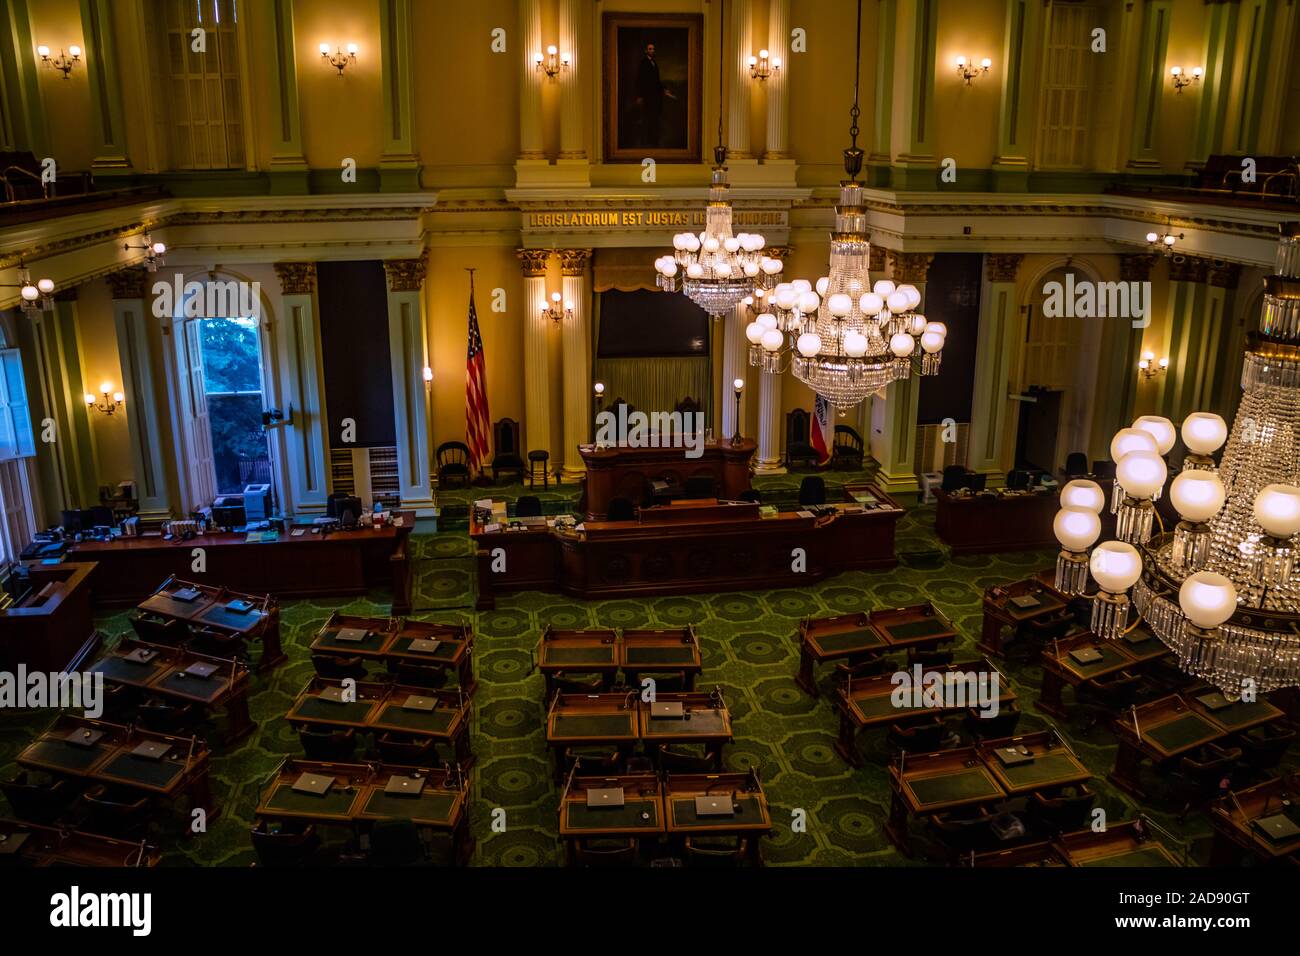 The center of administration in Sacramento State Capital, California Stock Photo